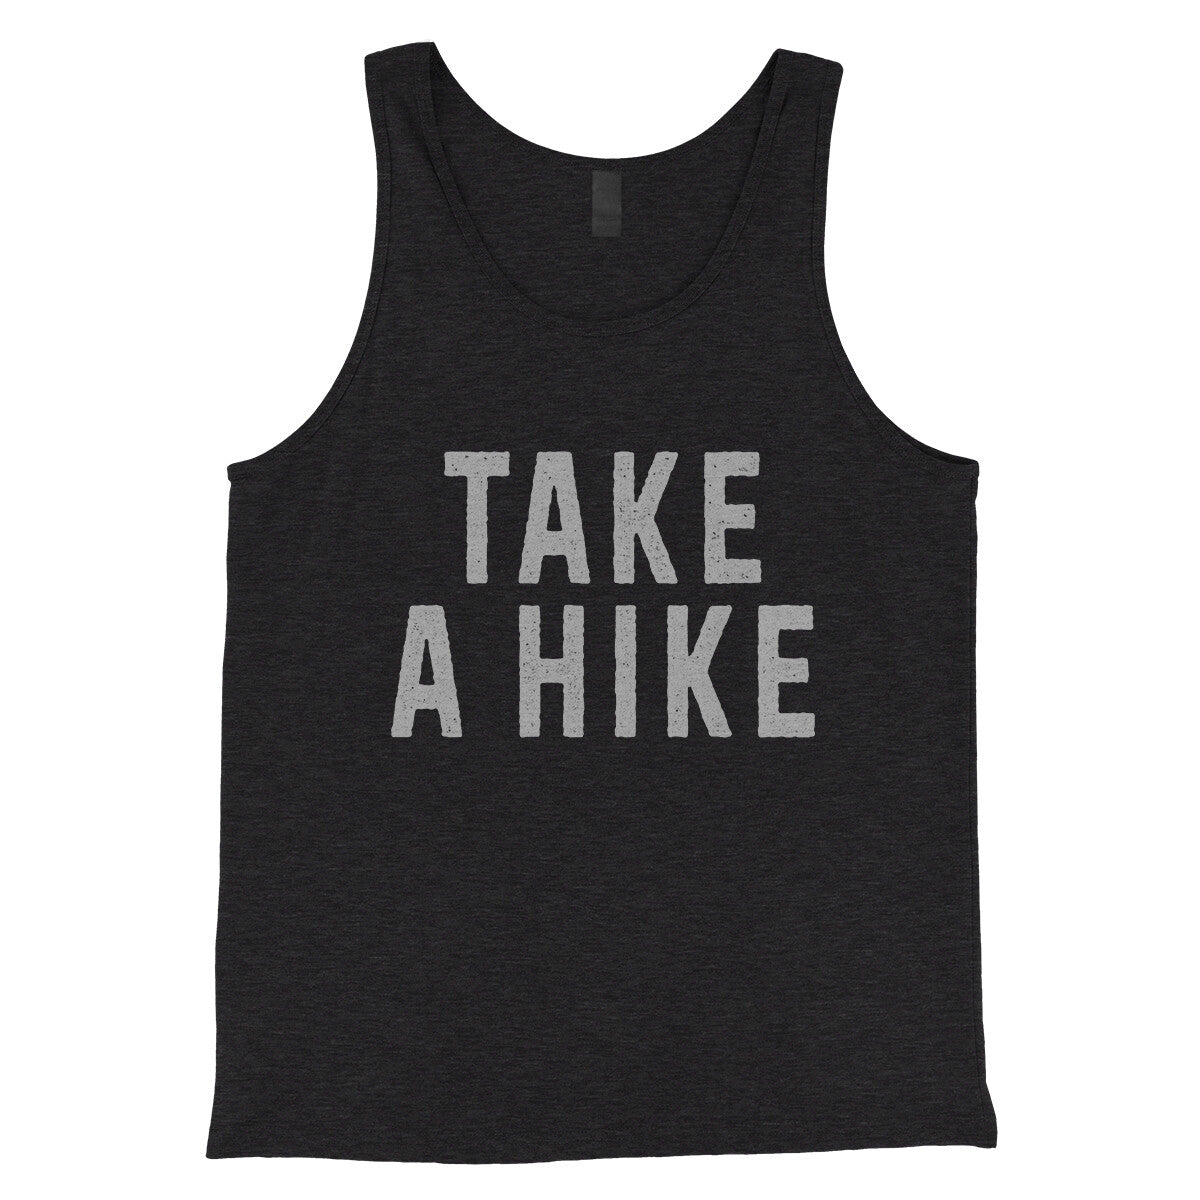 Take a Hike in Charcoal Black TriBlend Color